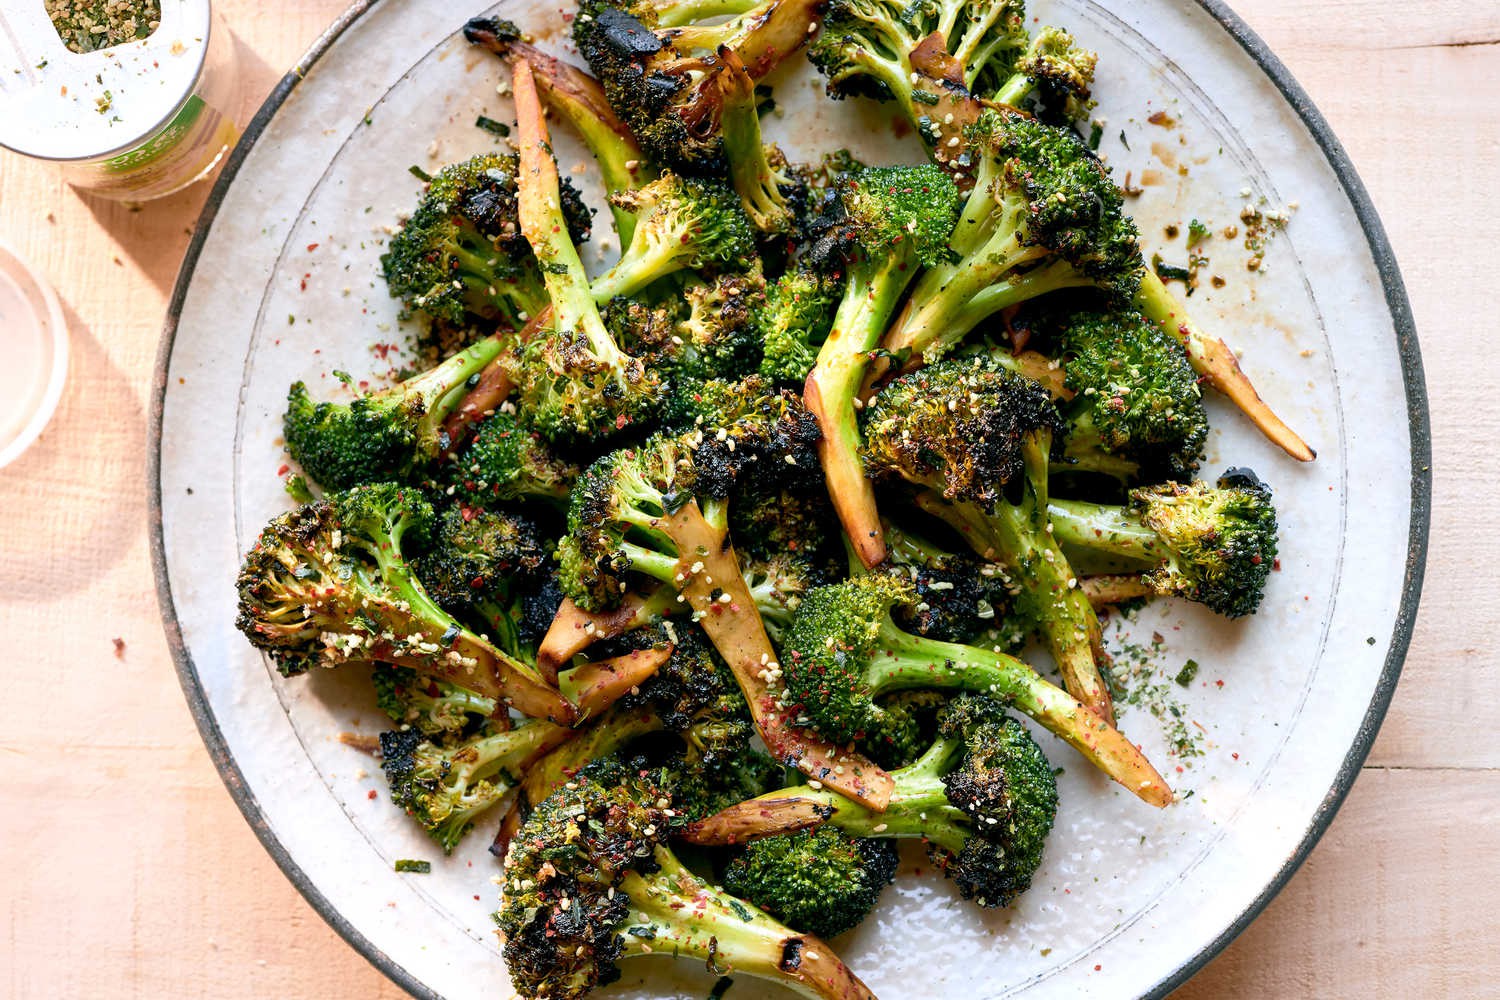 Grilled Broccoli with Soy Sauce, Maple Syrup and Balsamic